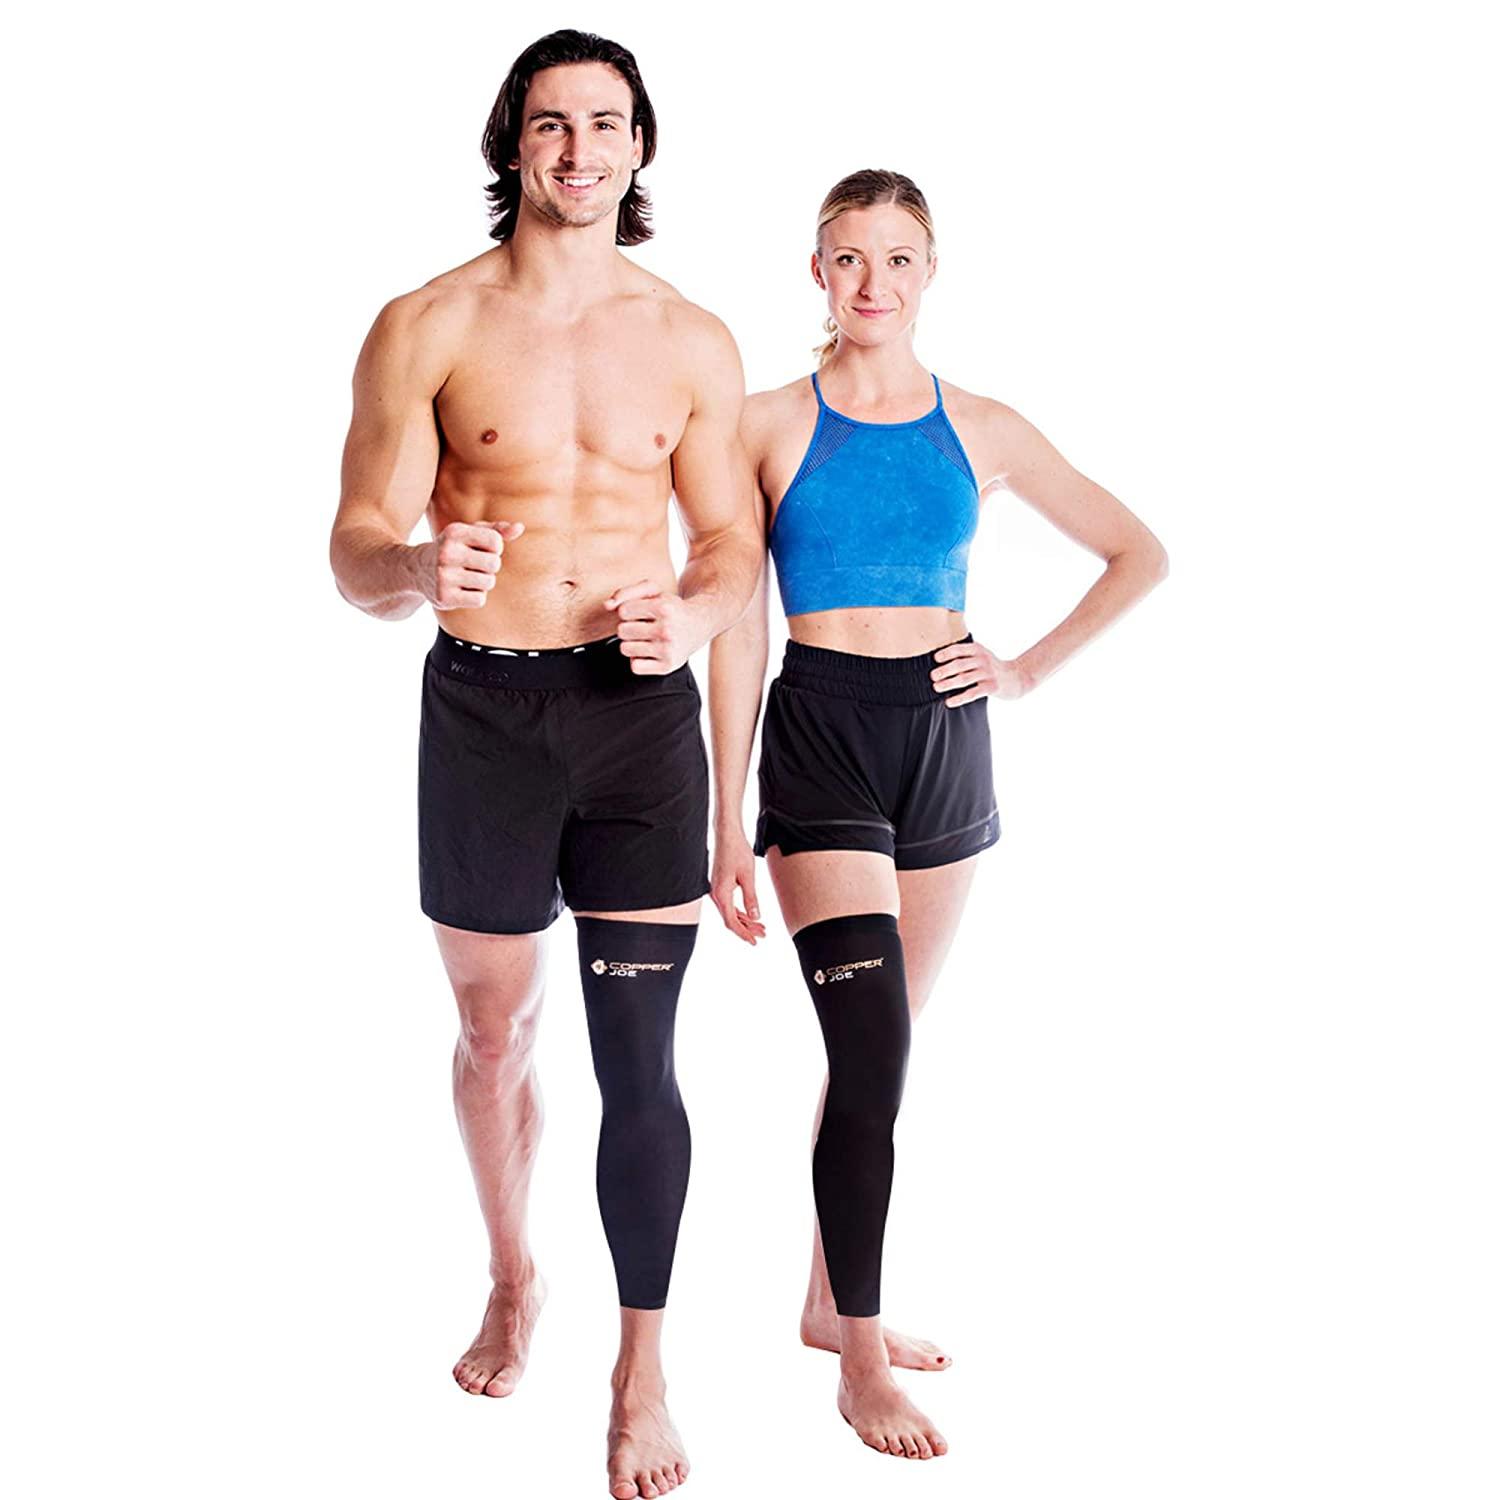 Copper Joe Full Leg Compression Sleeve - Ultimate Copper Infused, Support  for Knee, Thigh, Calf, Arthritis, Running and Basketball. Single Leg Pant  For Men & Women (Large) Large (Pack of 1)